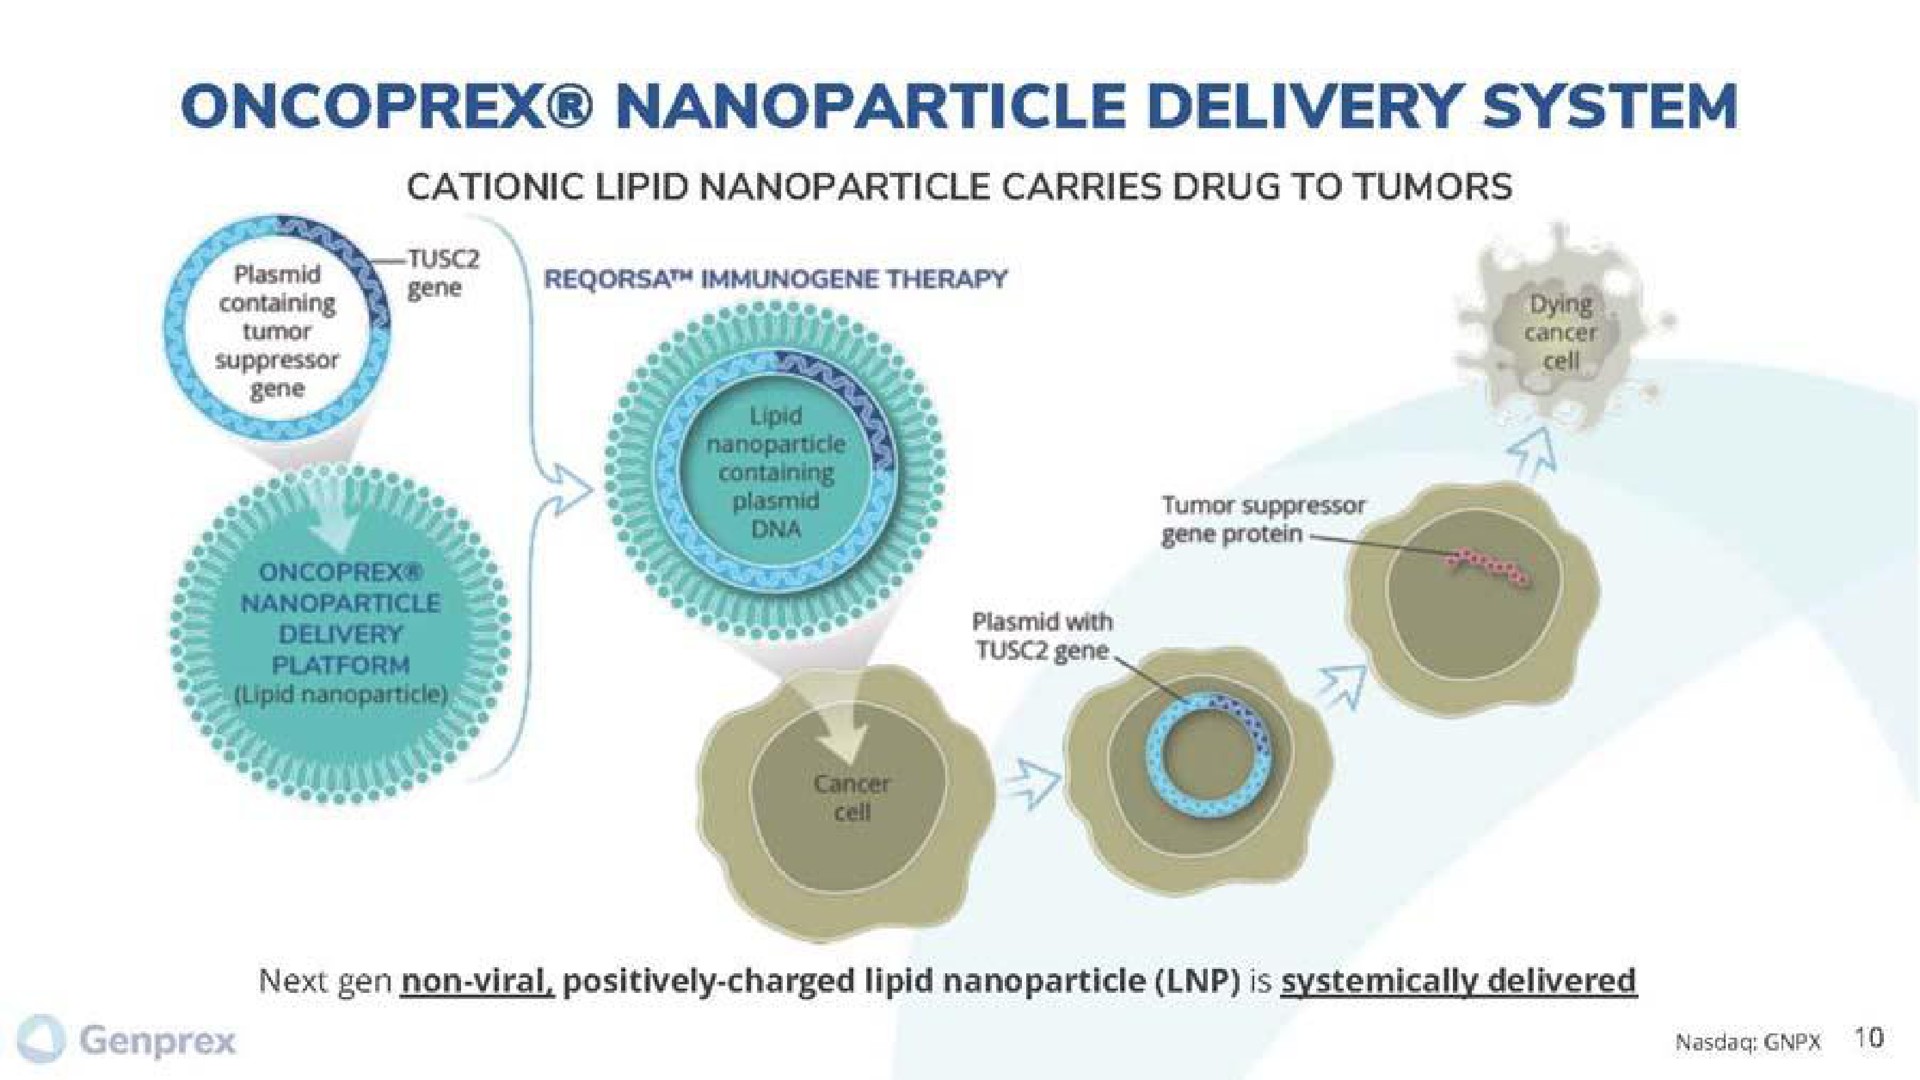 delivery system cationic carries drug to tumors | Genprex